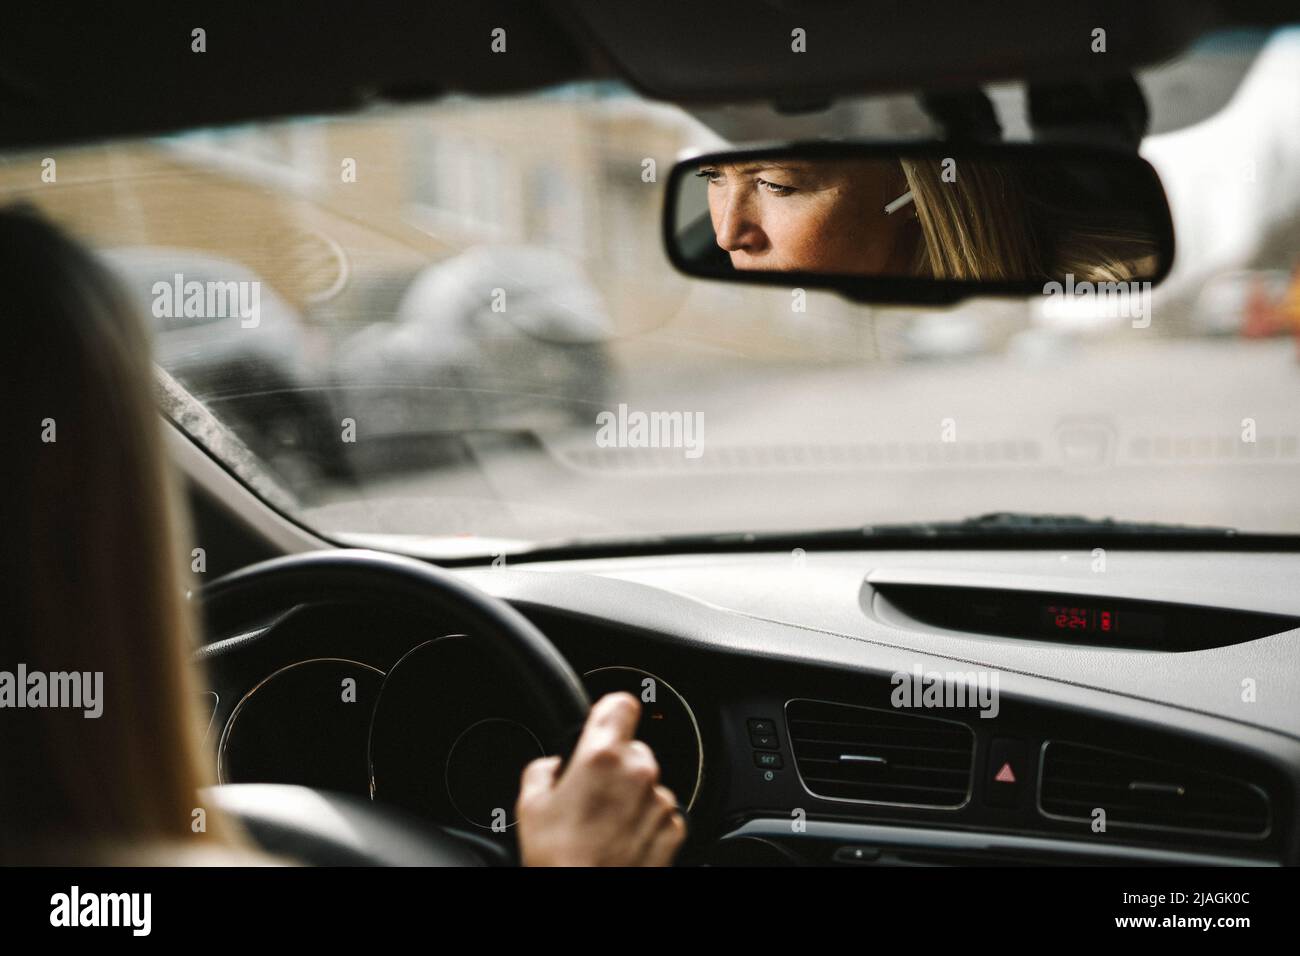 Reflection of businesswoman driving car seen on rear-view mirror Stock Photo